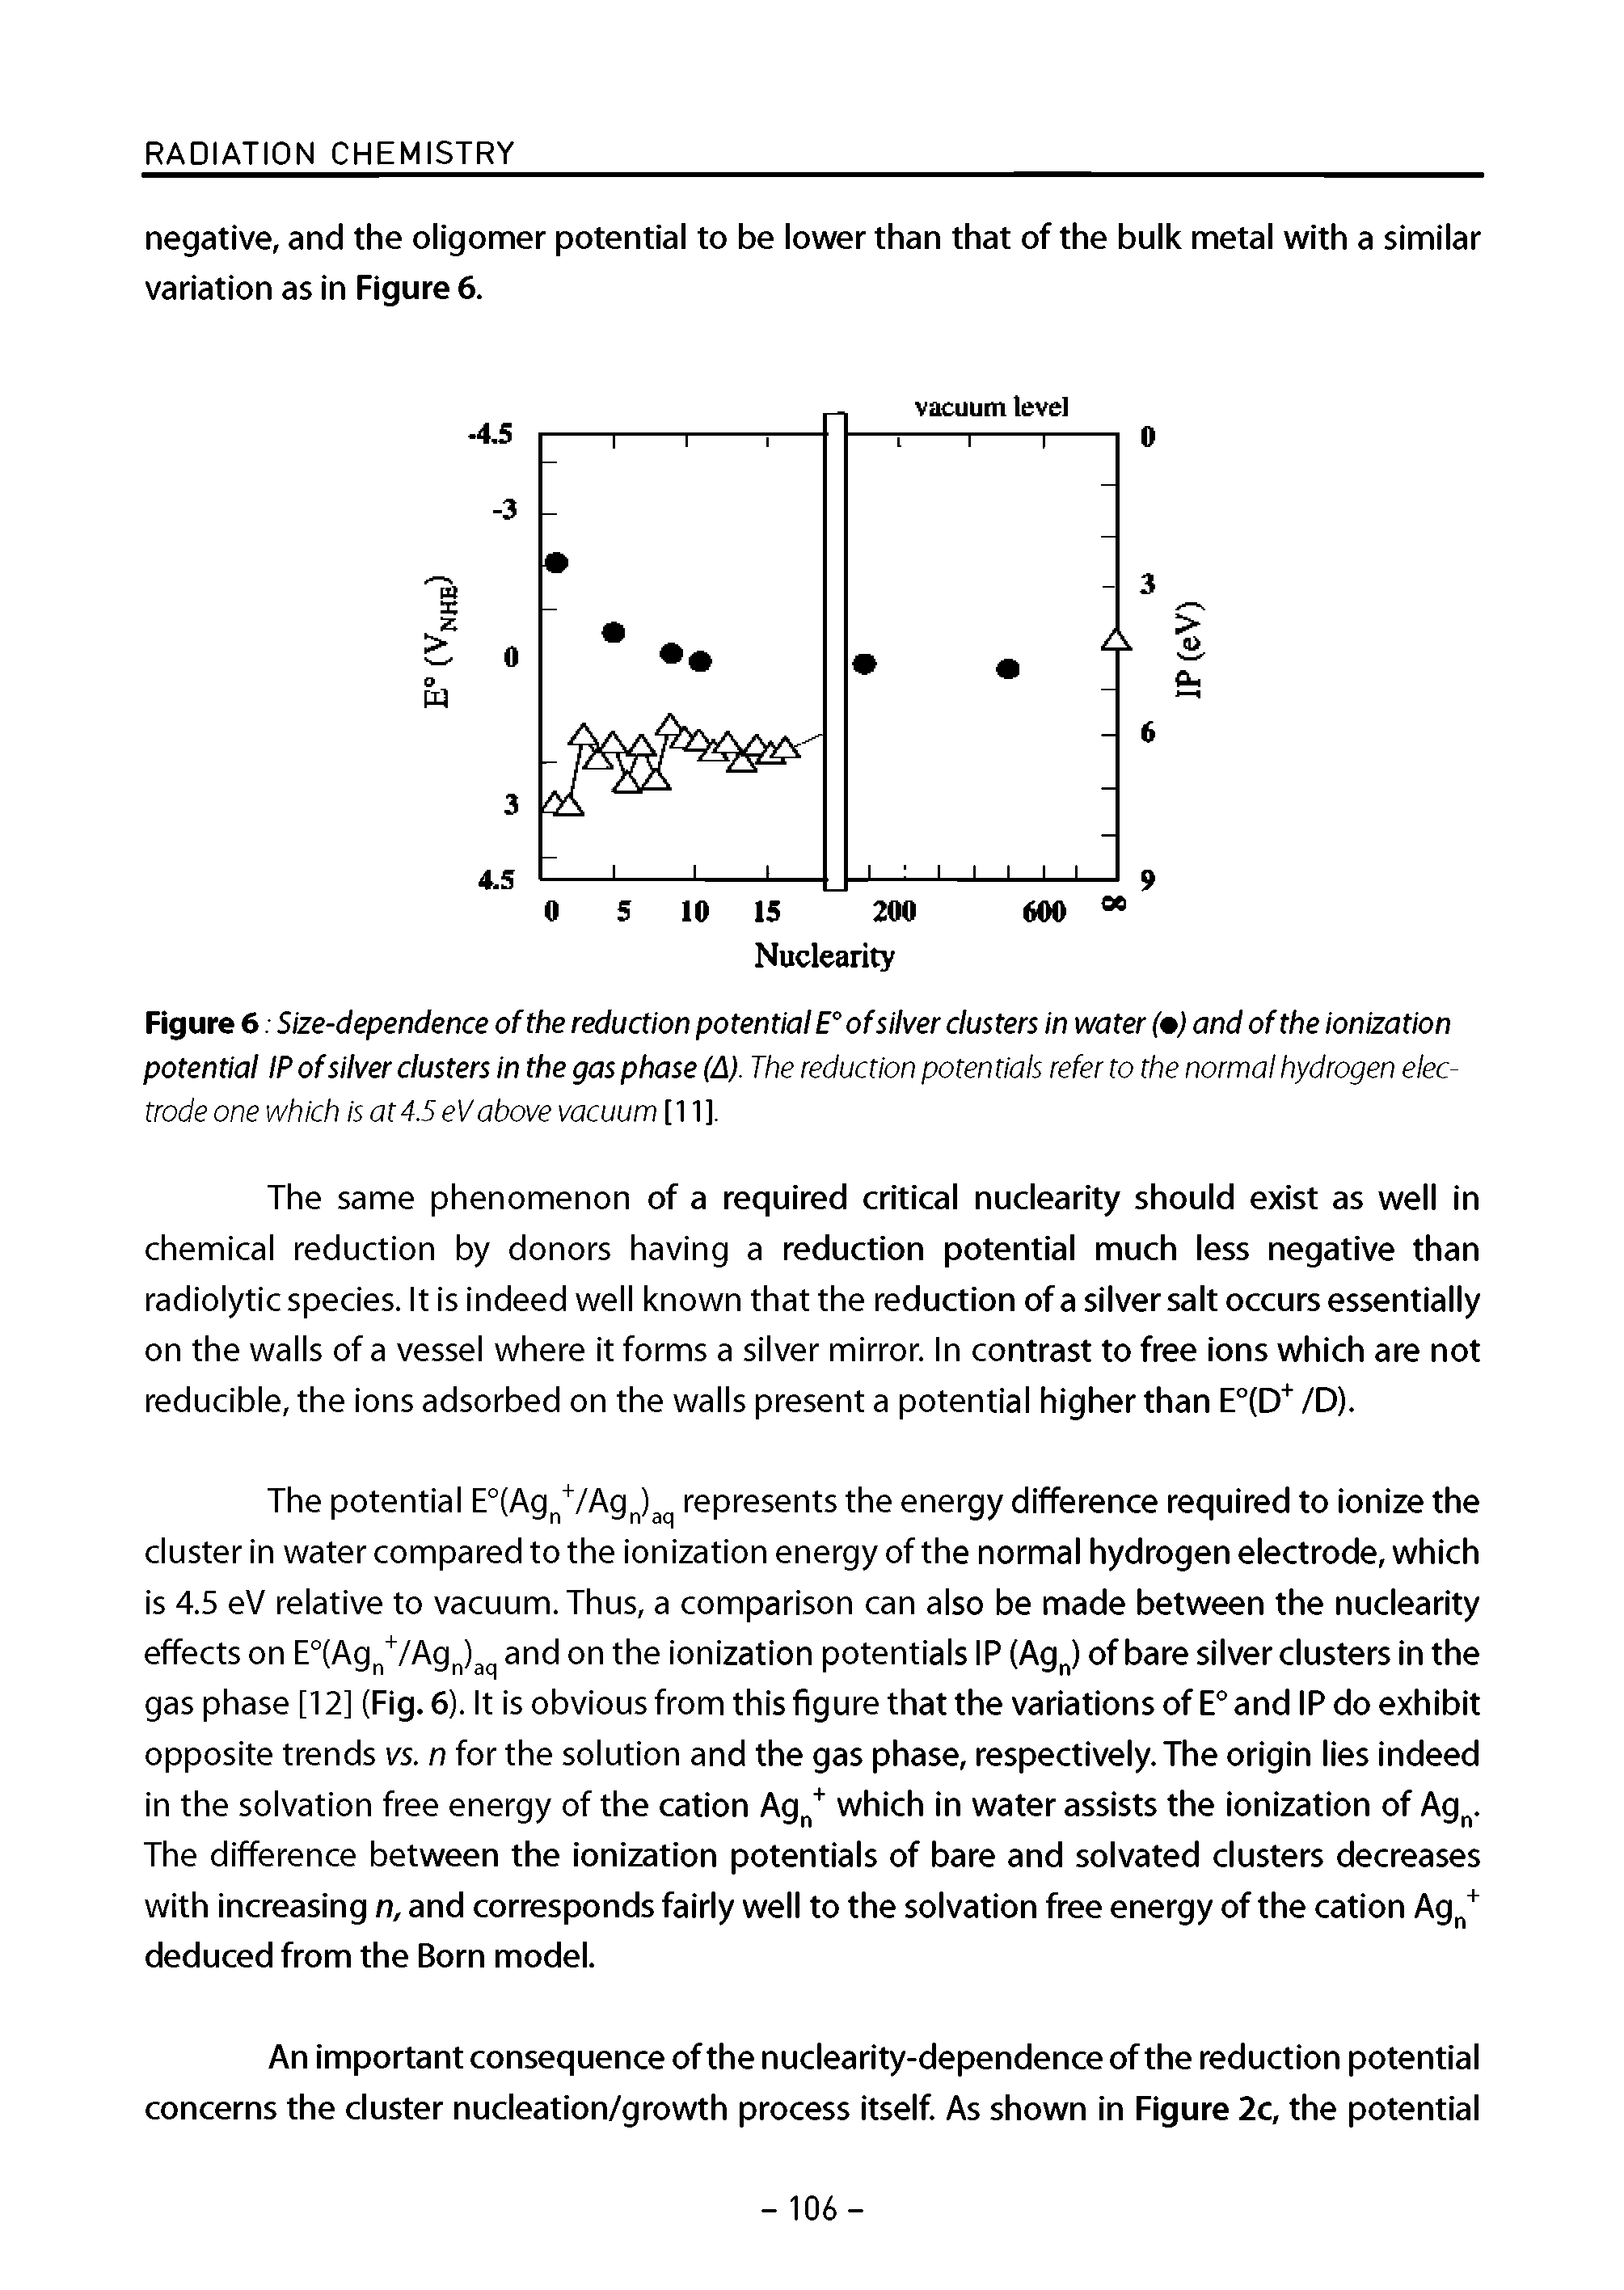 Figure 6. Size-dependence ofthe reduction potential E° of silver dusters in water ( ) and ofthe ionization potential IP of silver clusters in the gas phase (A). The reduction potentials refer to the normal hydrogen electrode one which is at4.5eVabove vacuum [11],...